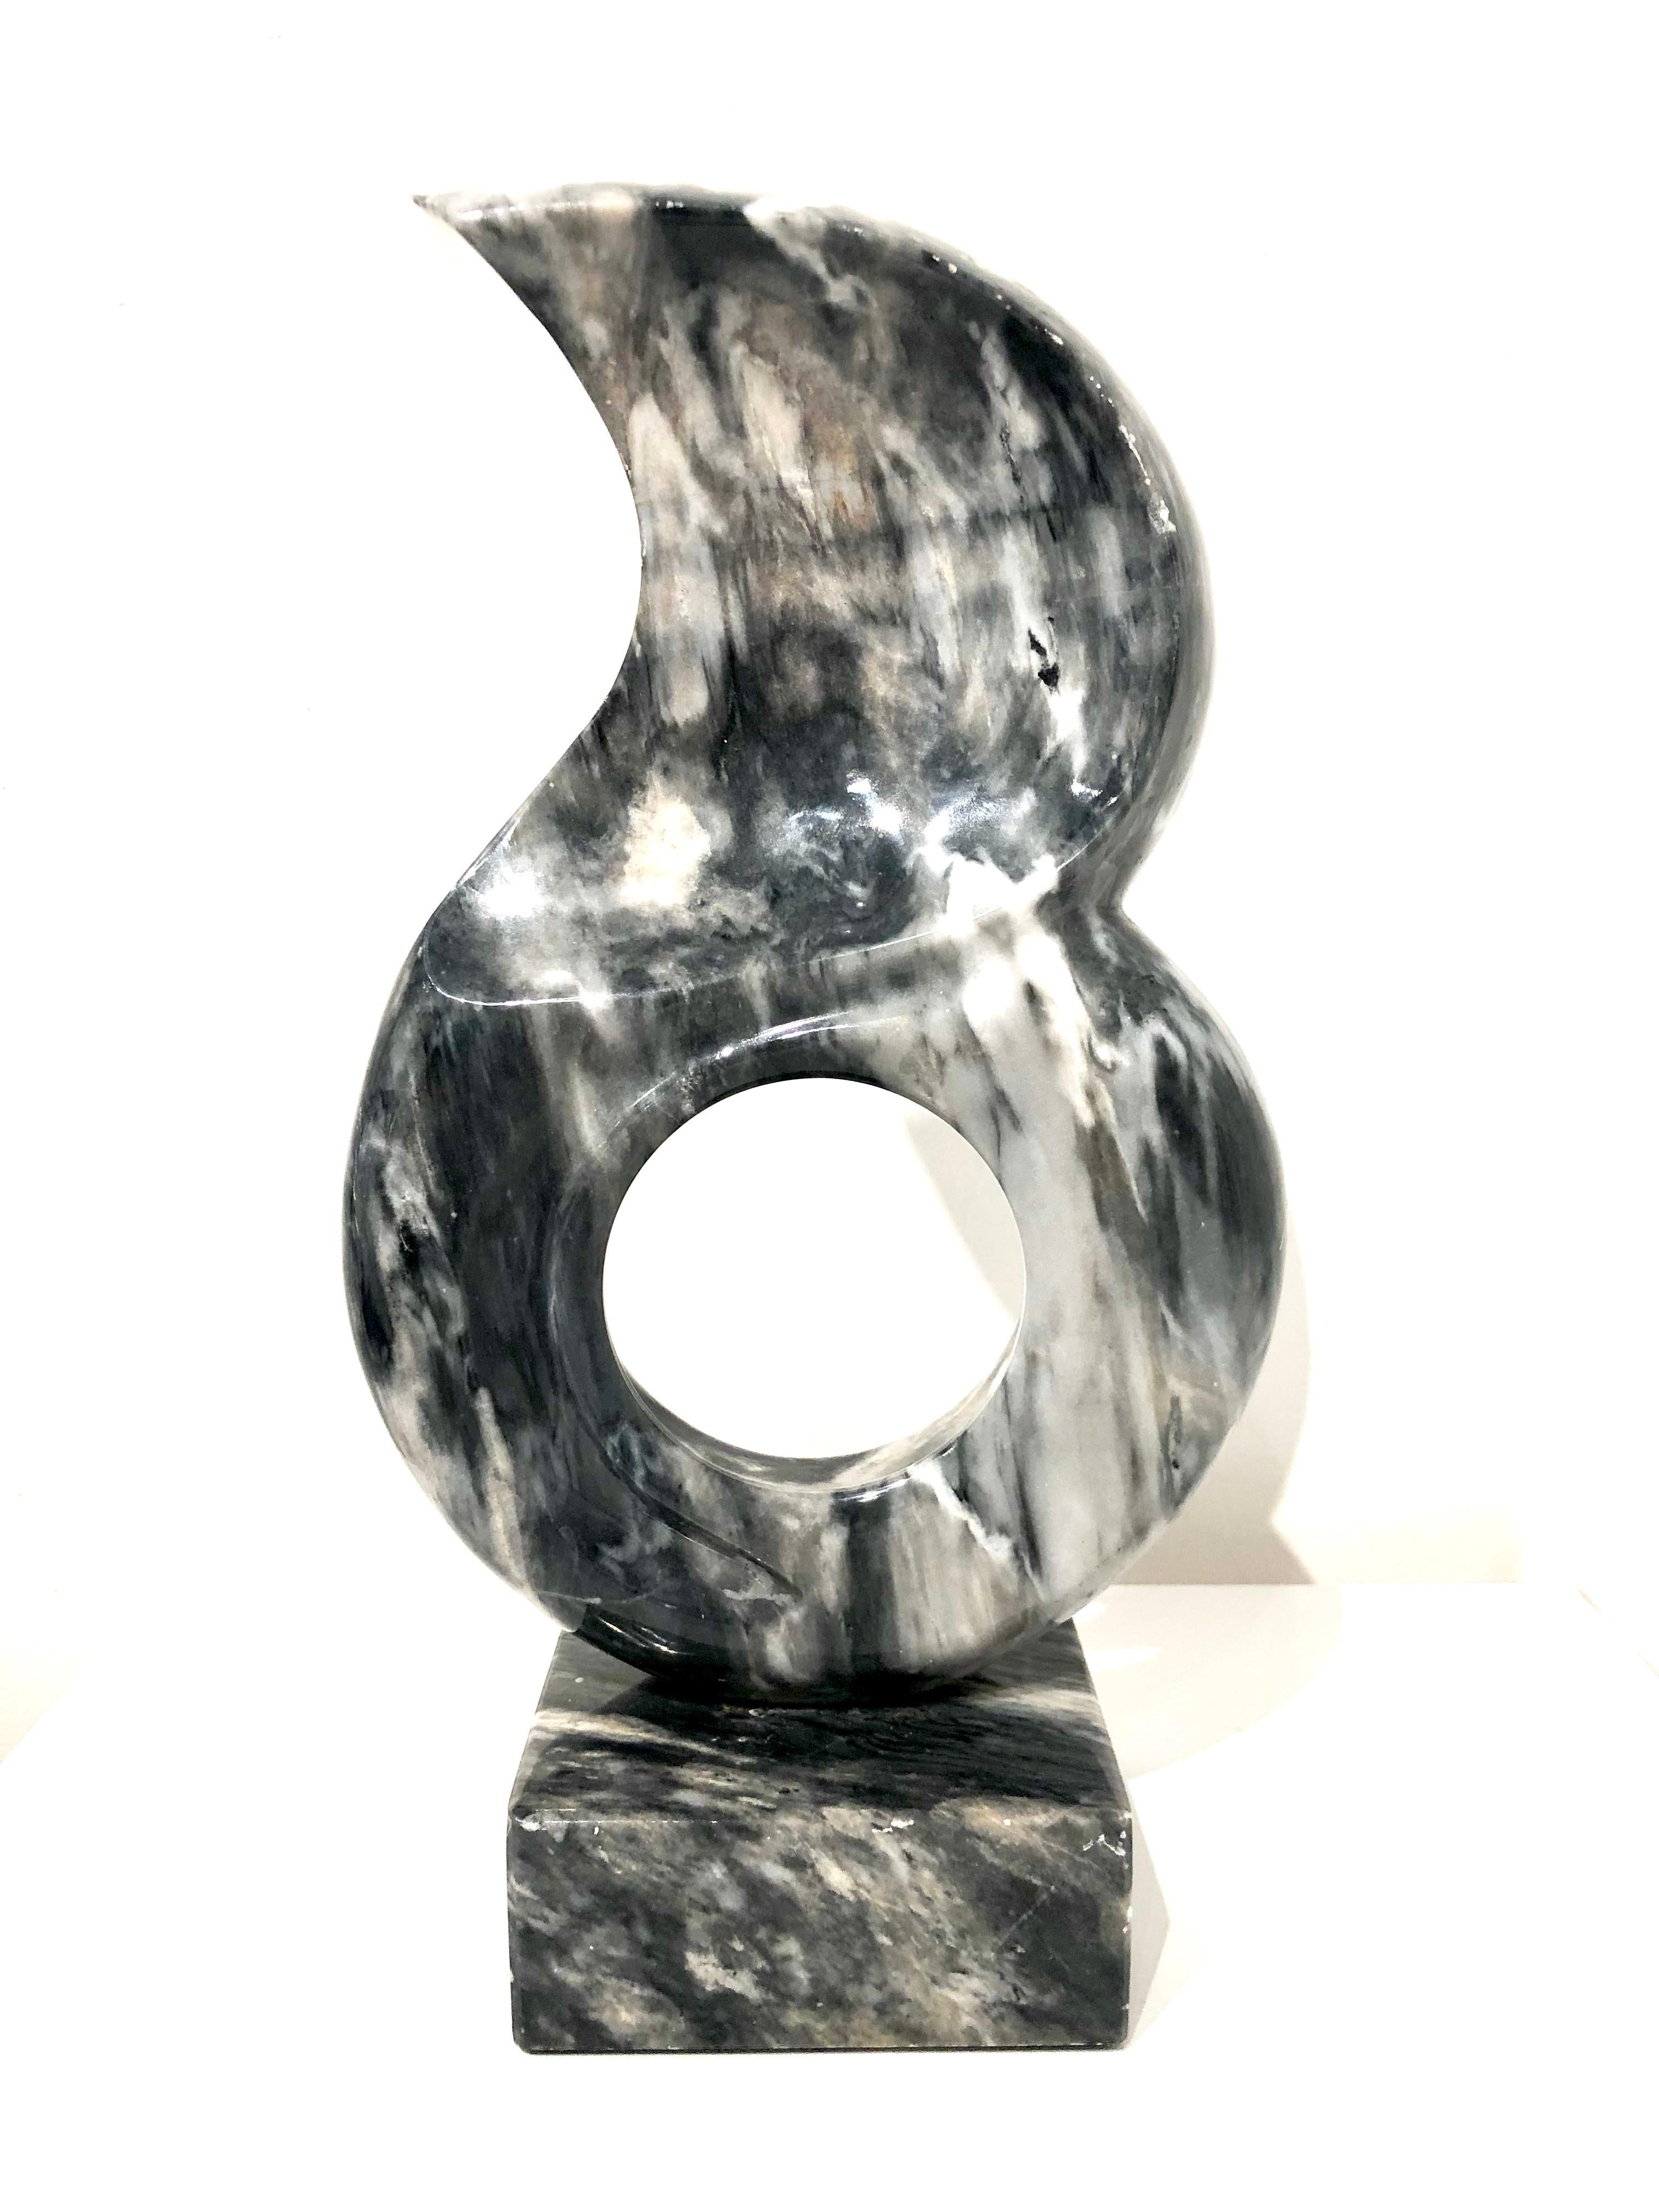 Hand carved and polished sculpture, in a black and white blend combination unsigned, circa 1990s.